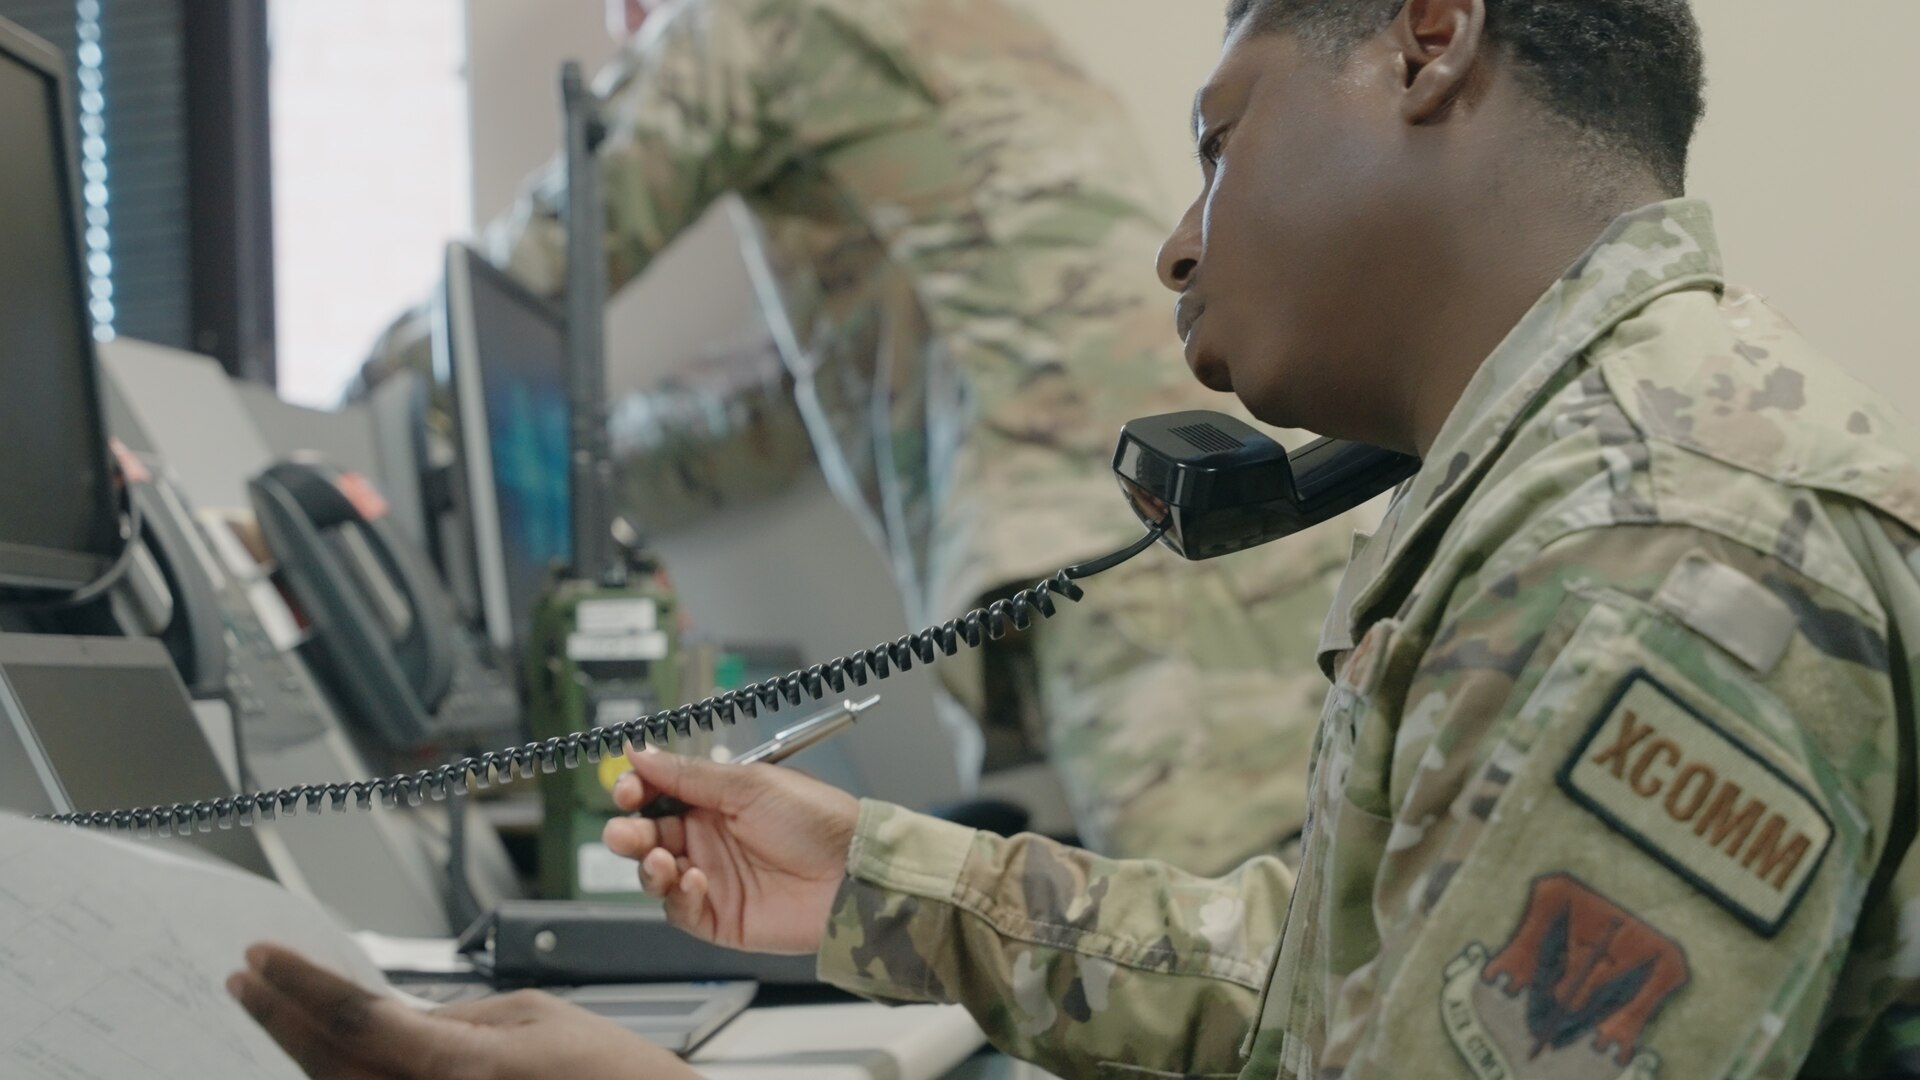 Tech. Sgt. Damon Whitehurst, a 226th Communications IT specialist, relays connectivity reports from disaggregated units to headquarters during Exercise Copperhead Beacon 23 at the group’s headquarters in Montgomery, Alabama, September 8, 2023